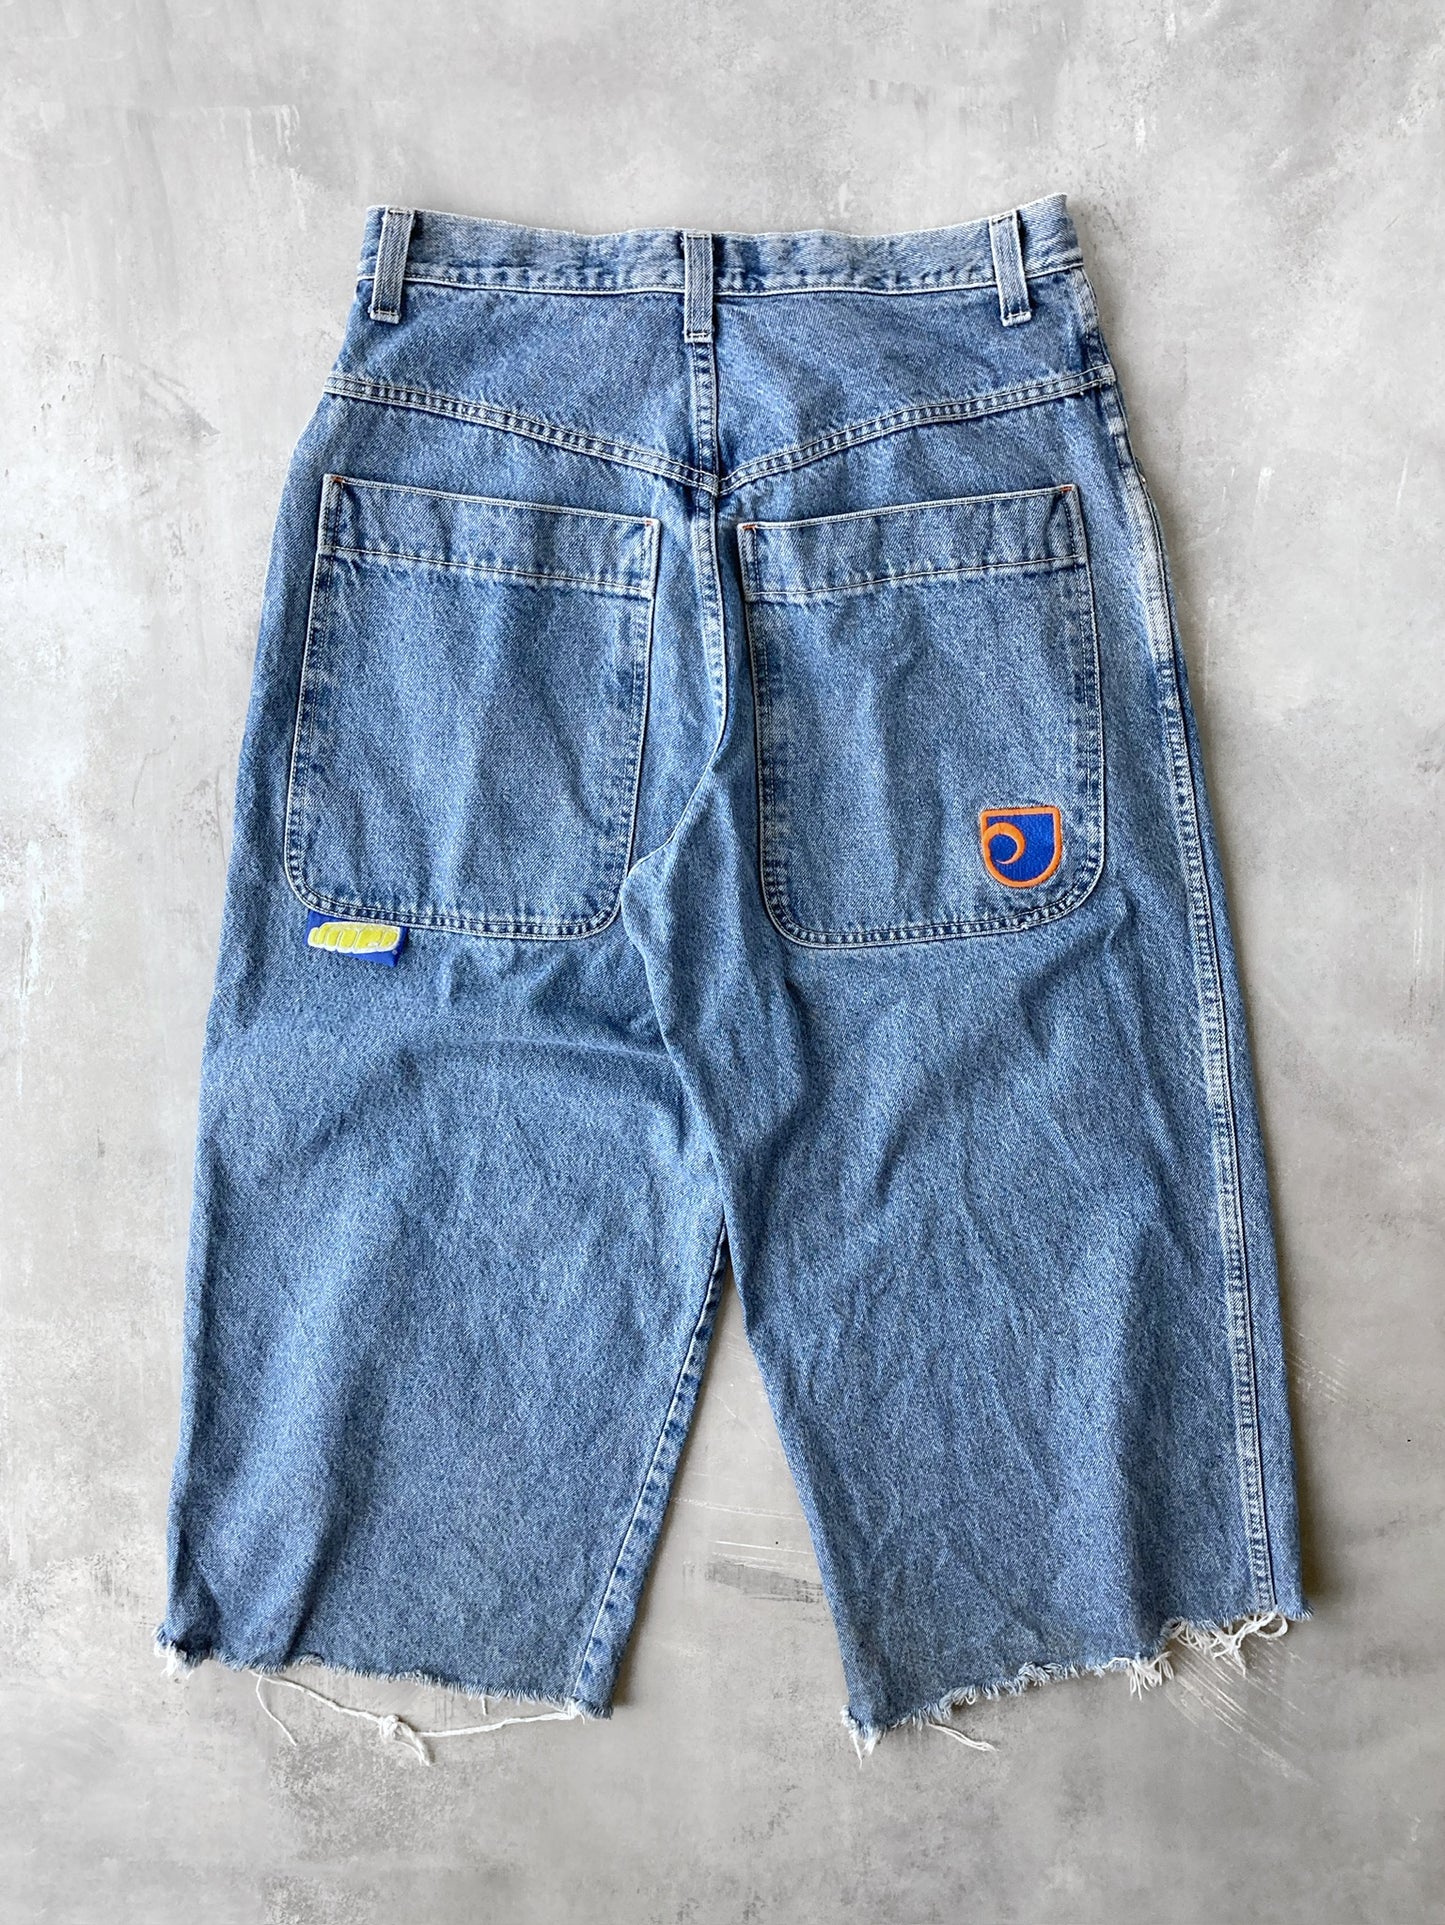 JNCO Cropped Jeans 90's - 33x25